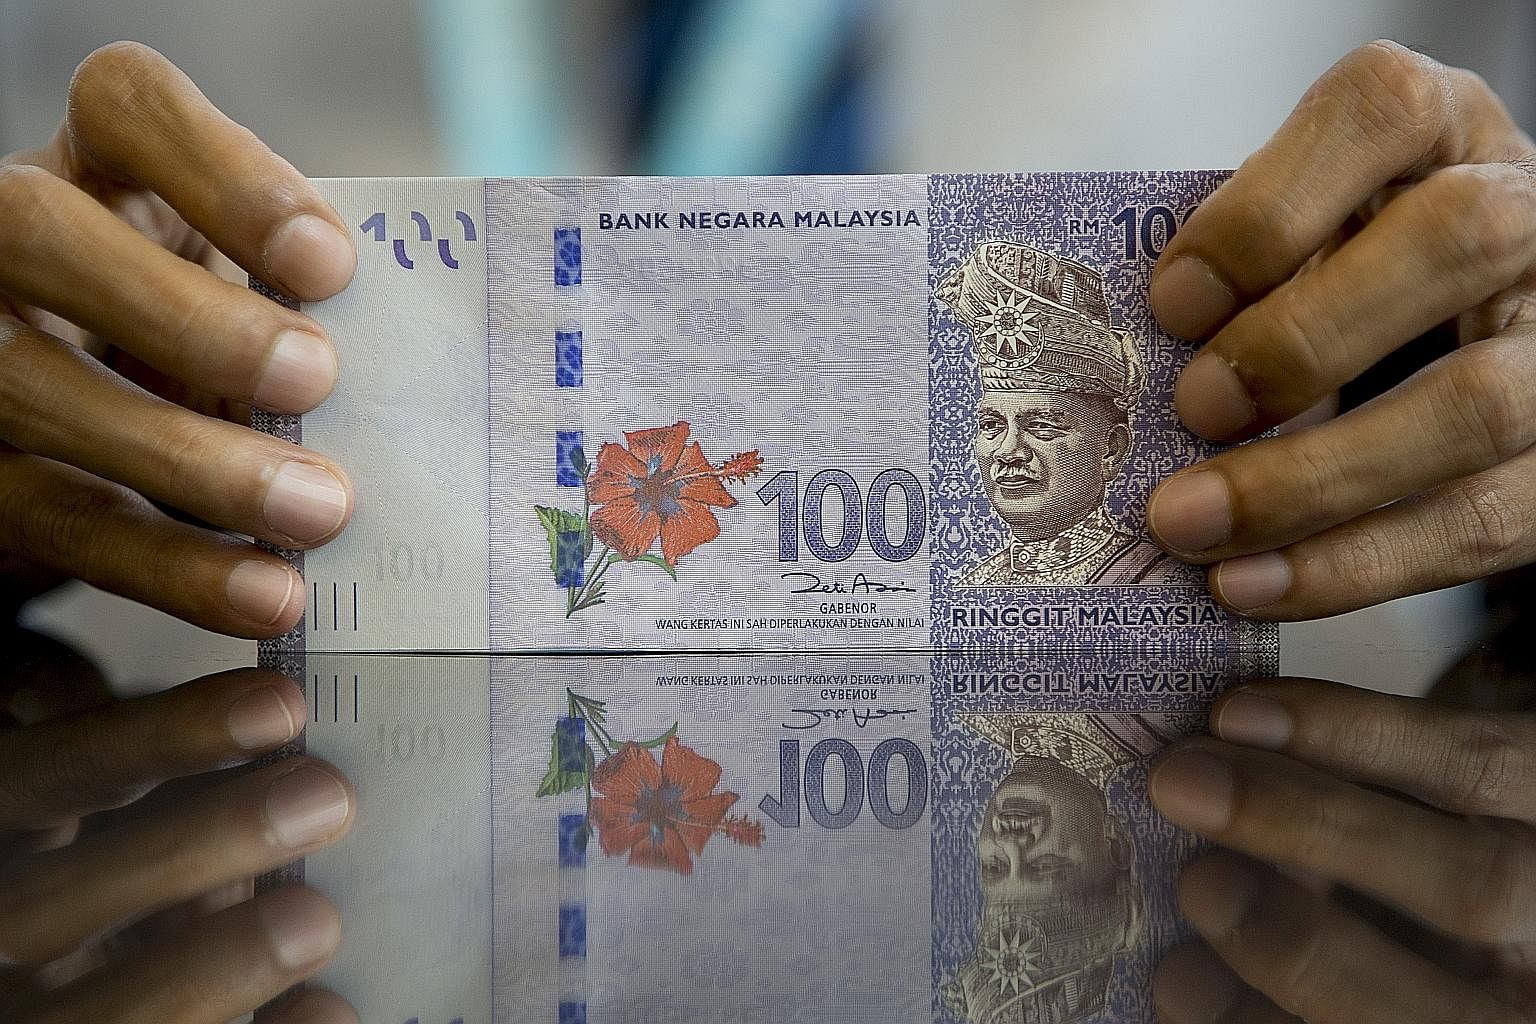 The ringgit has suffered an 18 per cent plunge over the past 12 months, with the currency at its lowest level in 17 years.